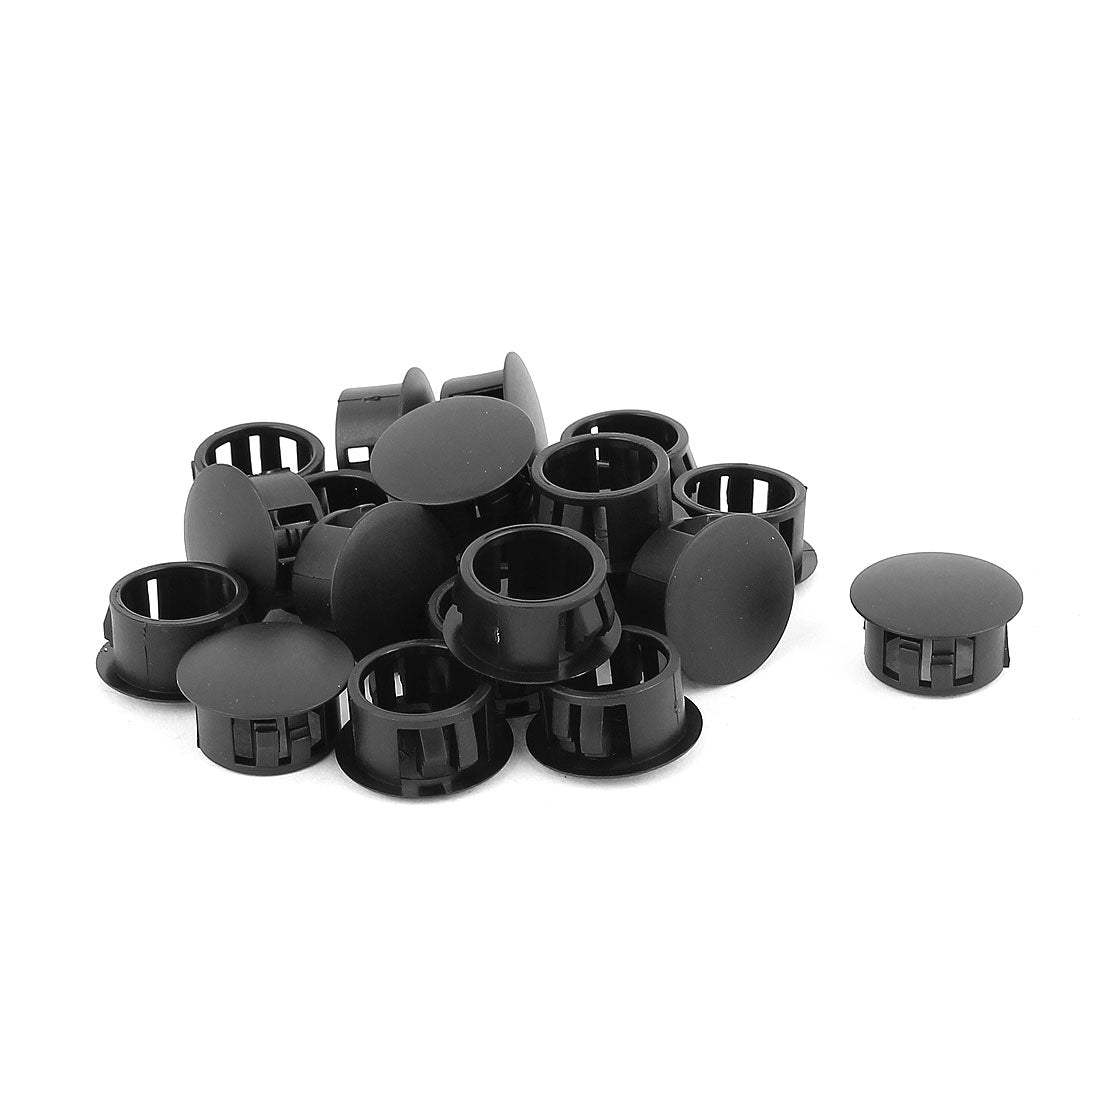 Uxcell Uxcell 20 Pcs SKT-16 Nylon 16mm Diameter Snap in Type Locking Hole Button Cover